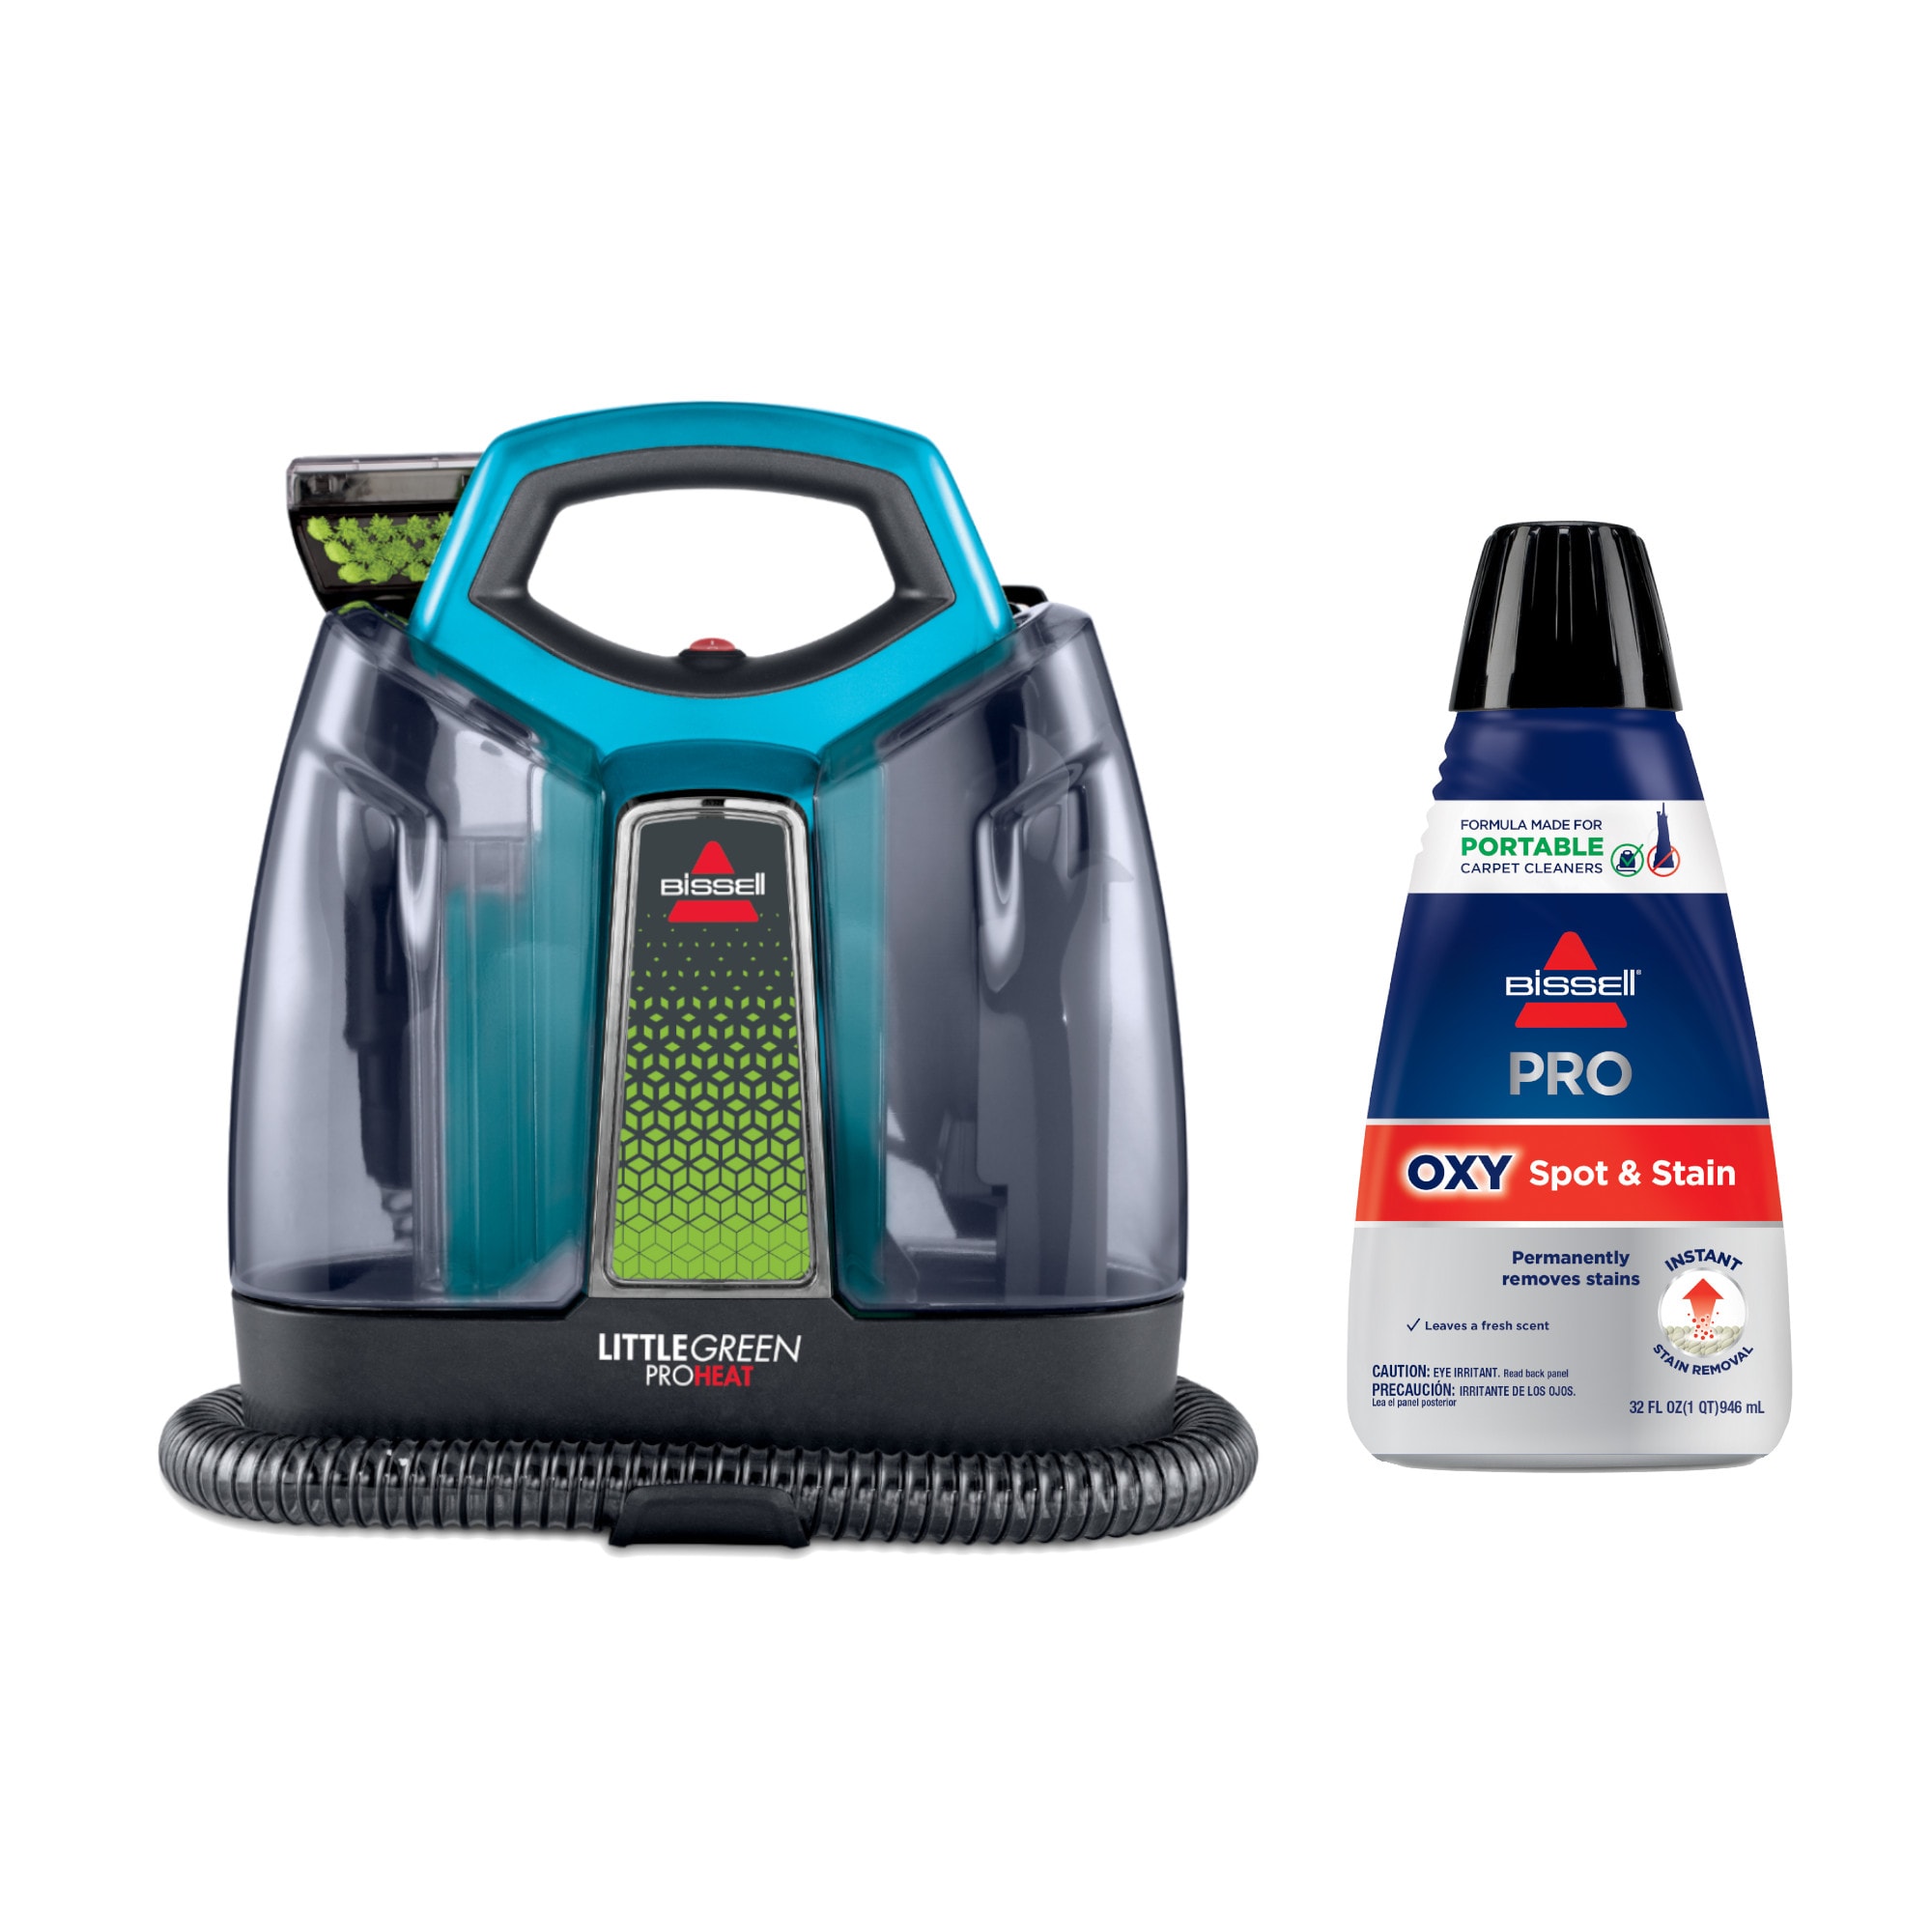 BISSELL SpotClean Black Portable Carpet Cleaner - 3624 for sale online